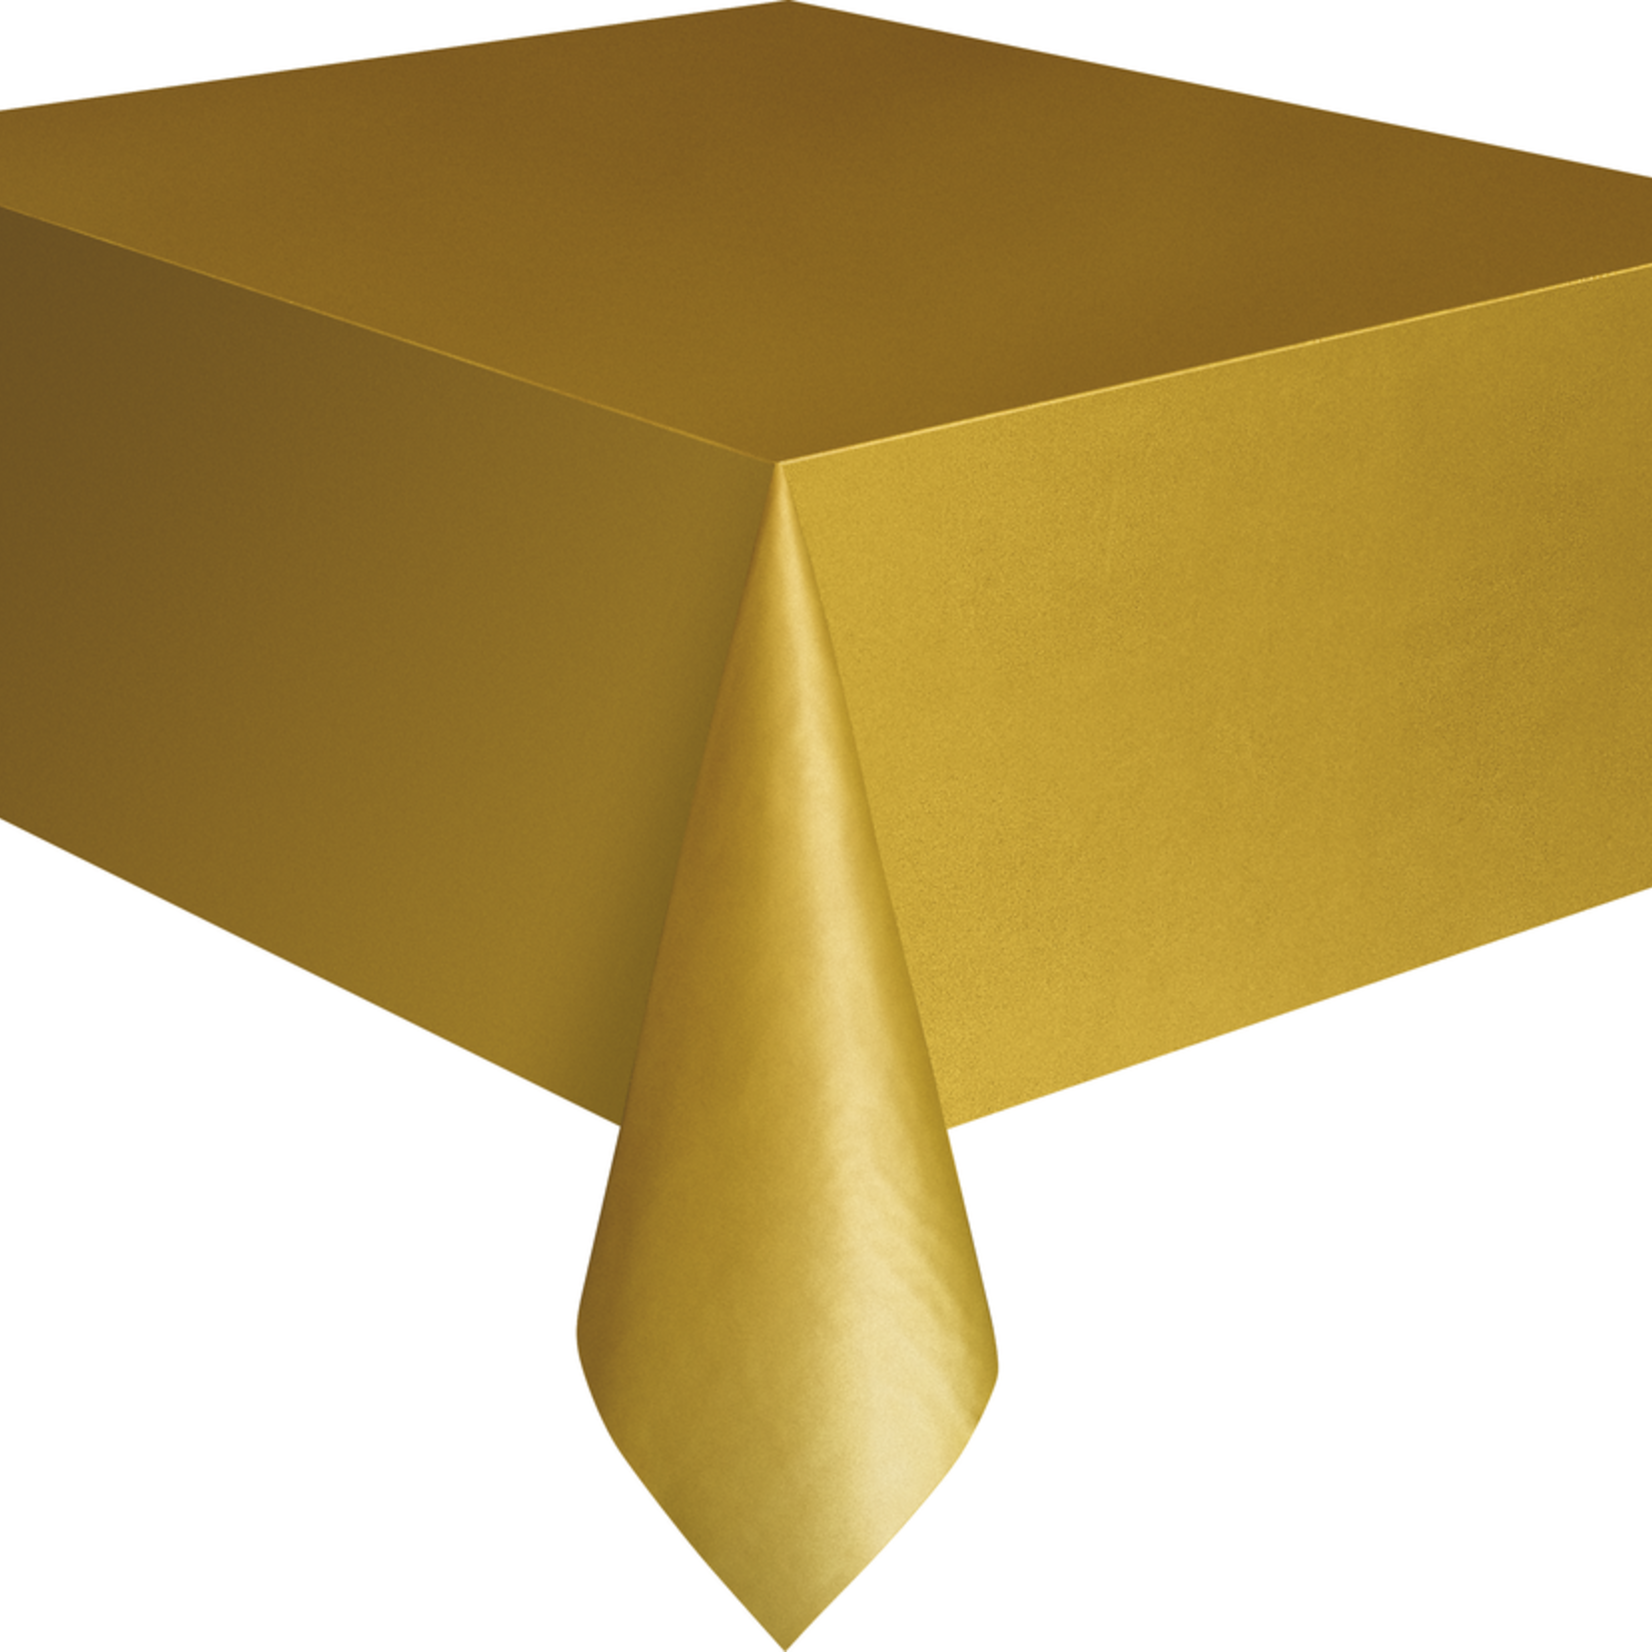 Plastic Tablecover 54""x108"" -Gold